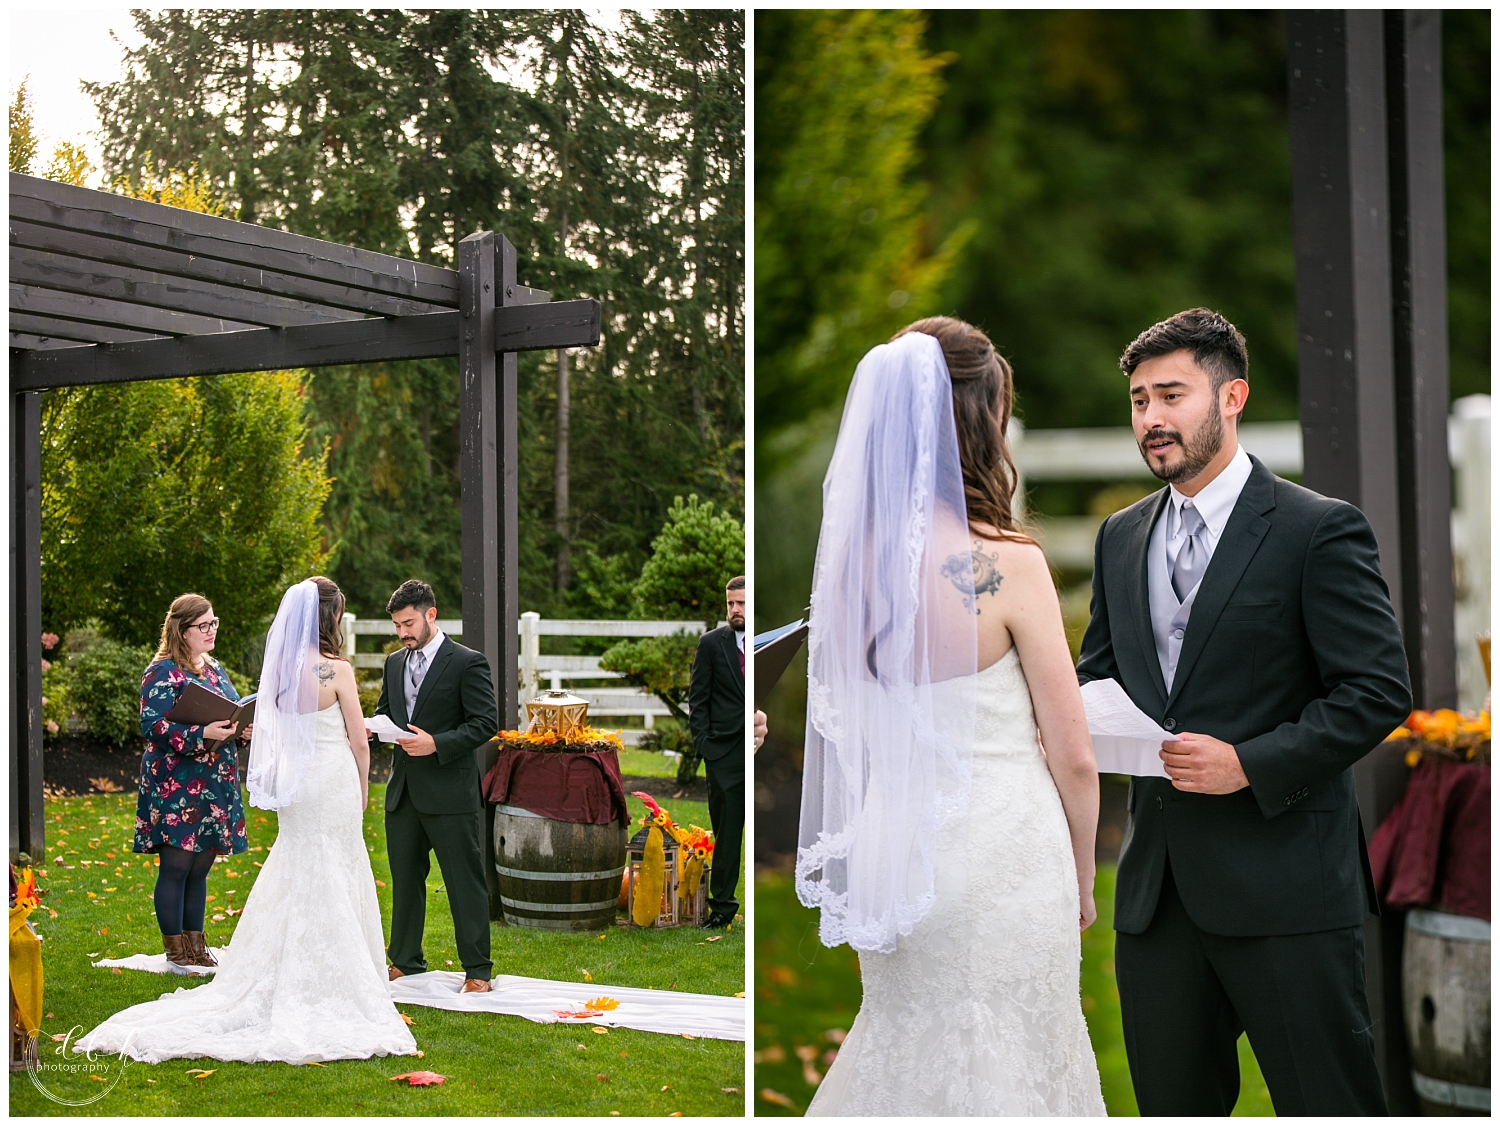 bride and groom exchange vows at their fall wedding ceremony at Filigree Farm in Buckley, Washington